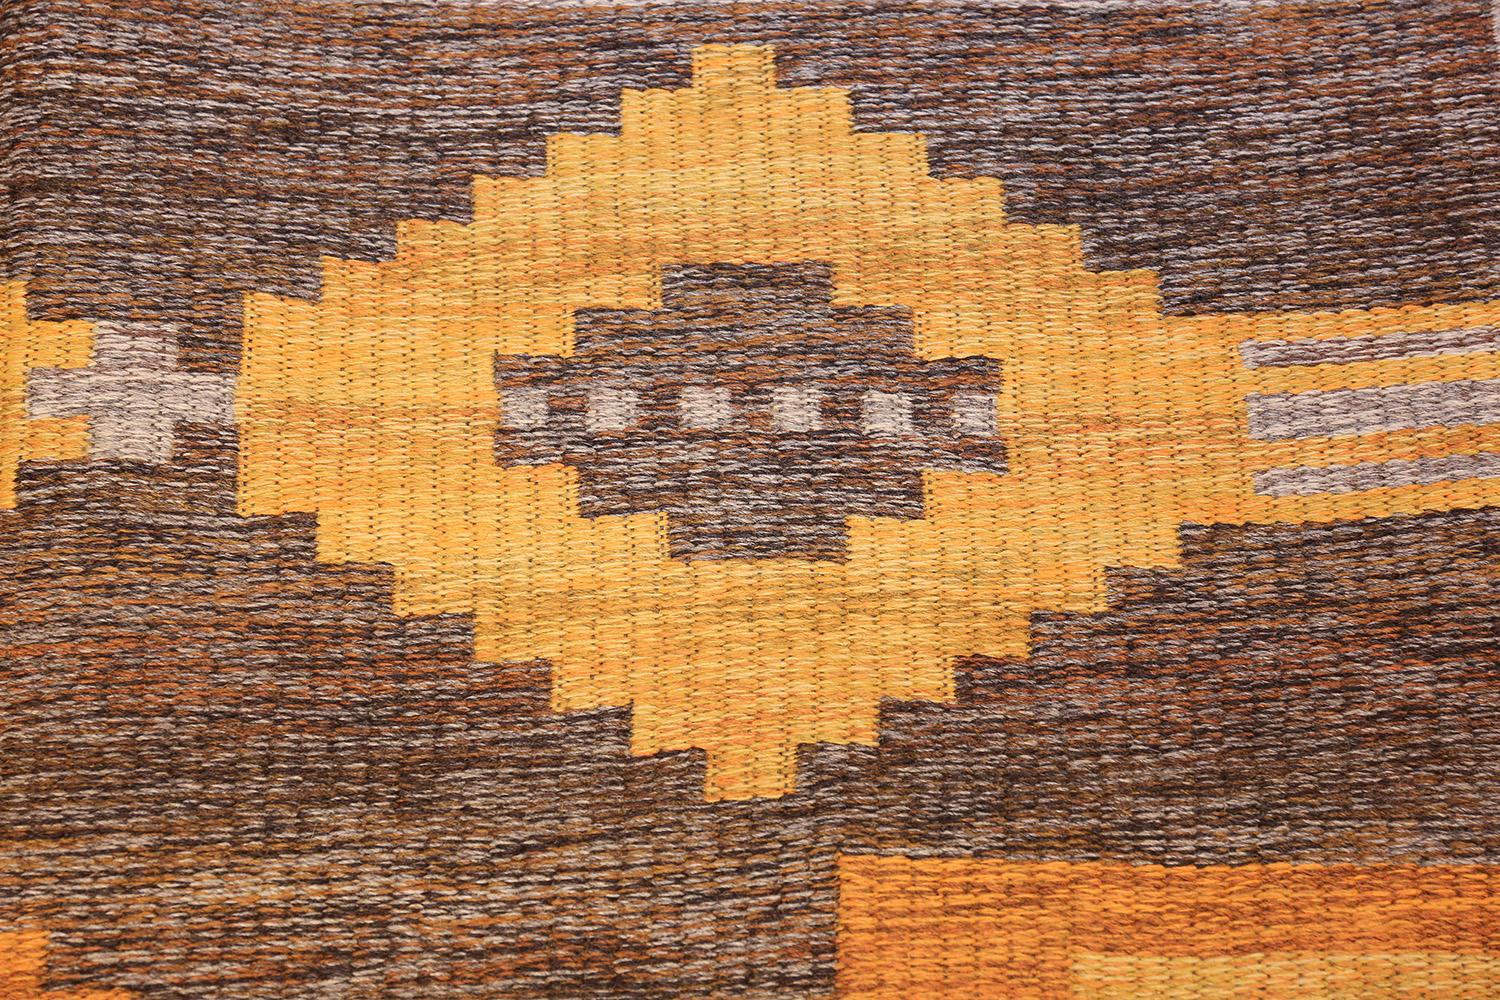 Vintage Double-Sided Swedish Kilim Rug. Size: 5 ft x 7 ft 8 in (1.52 m x 2.34 m) 4